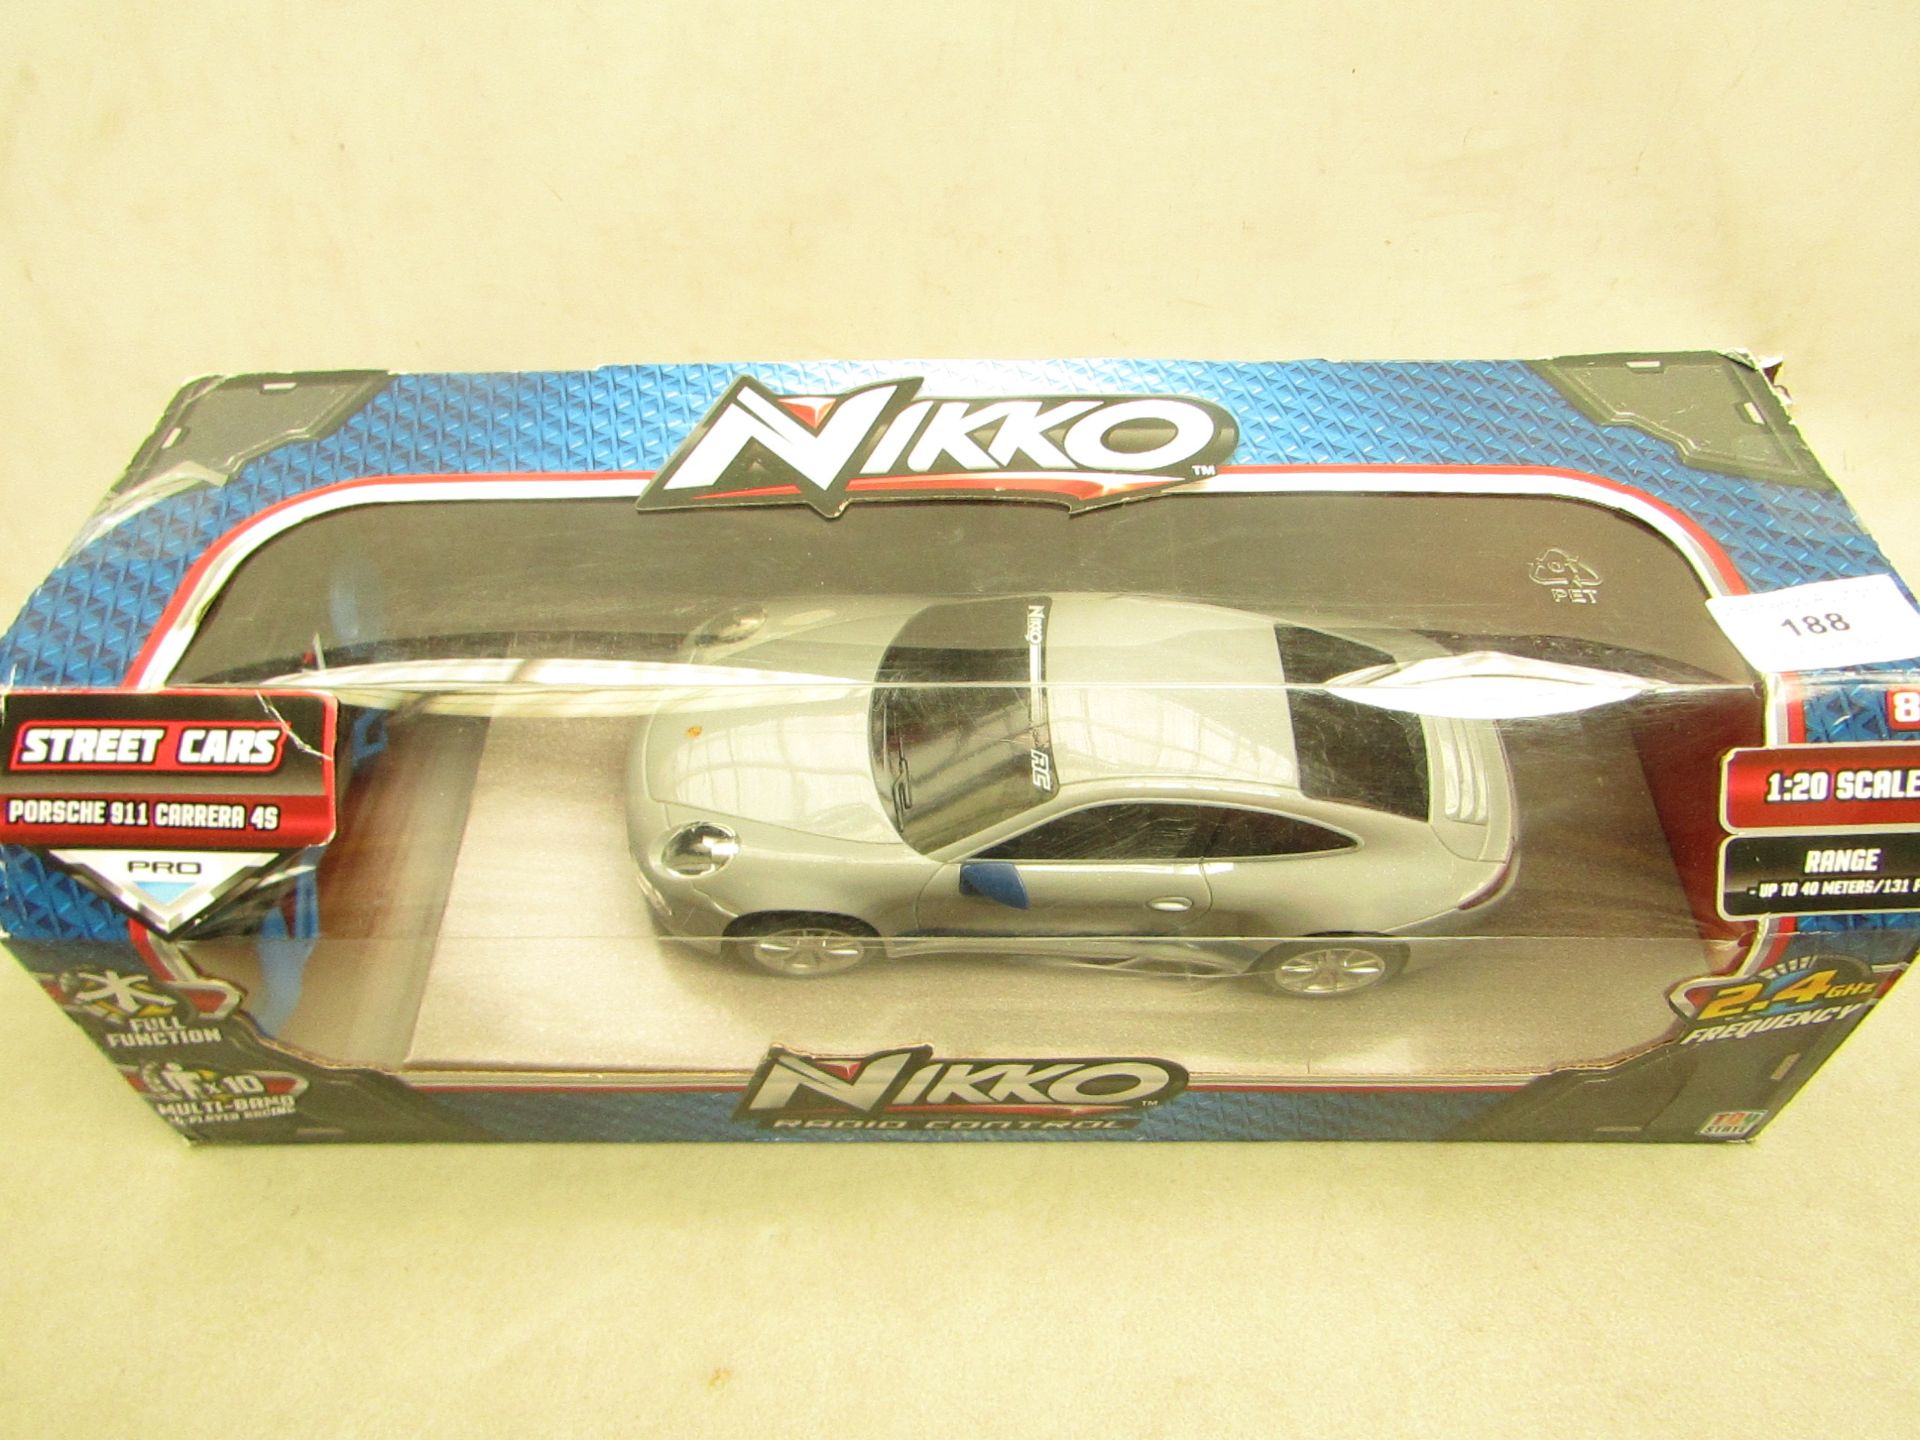 Nikko Radio Controlled Car. Boxed & look New but untested